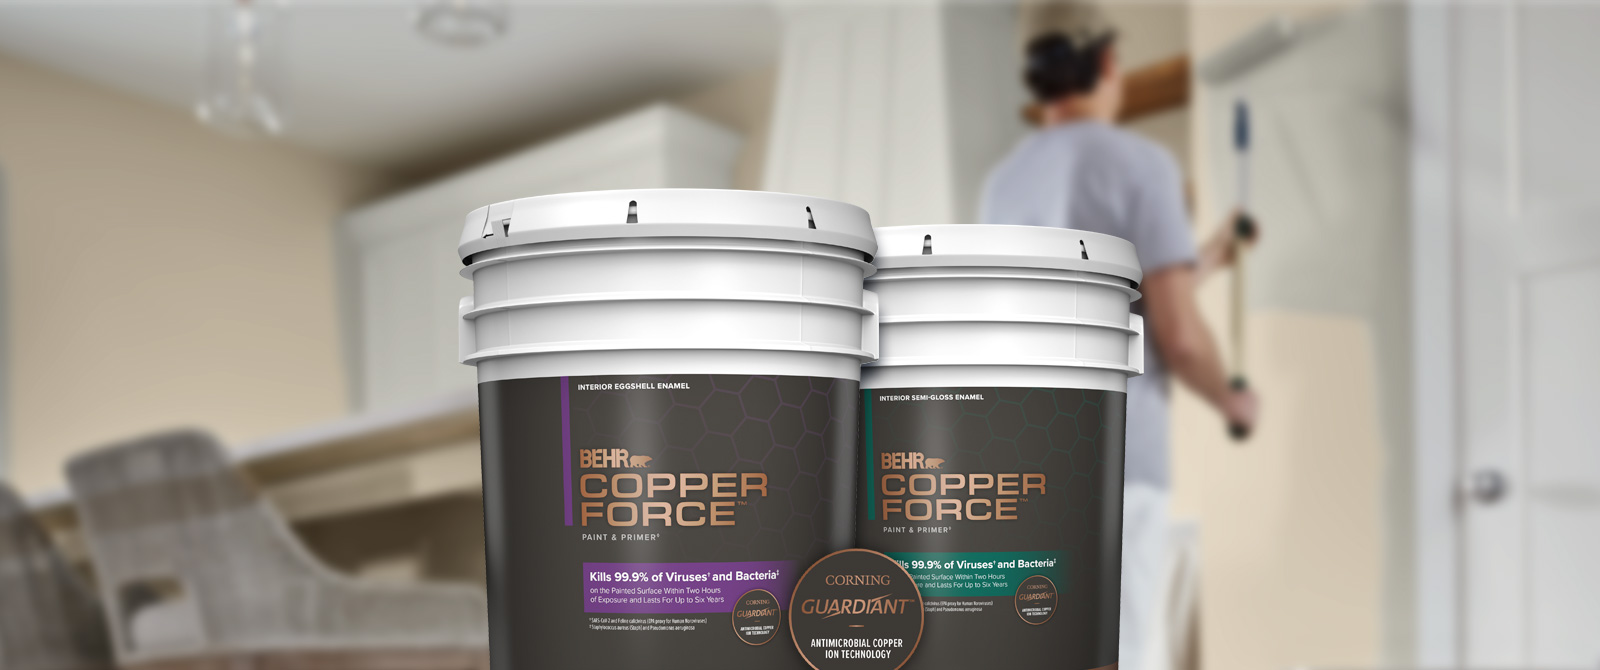 Product line up image of BEHR Copper Force Interior Paint